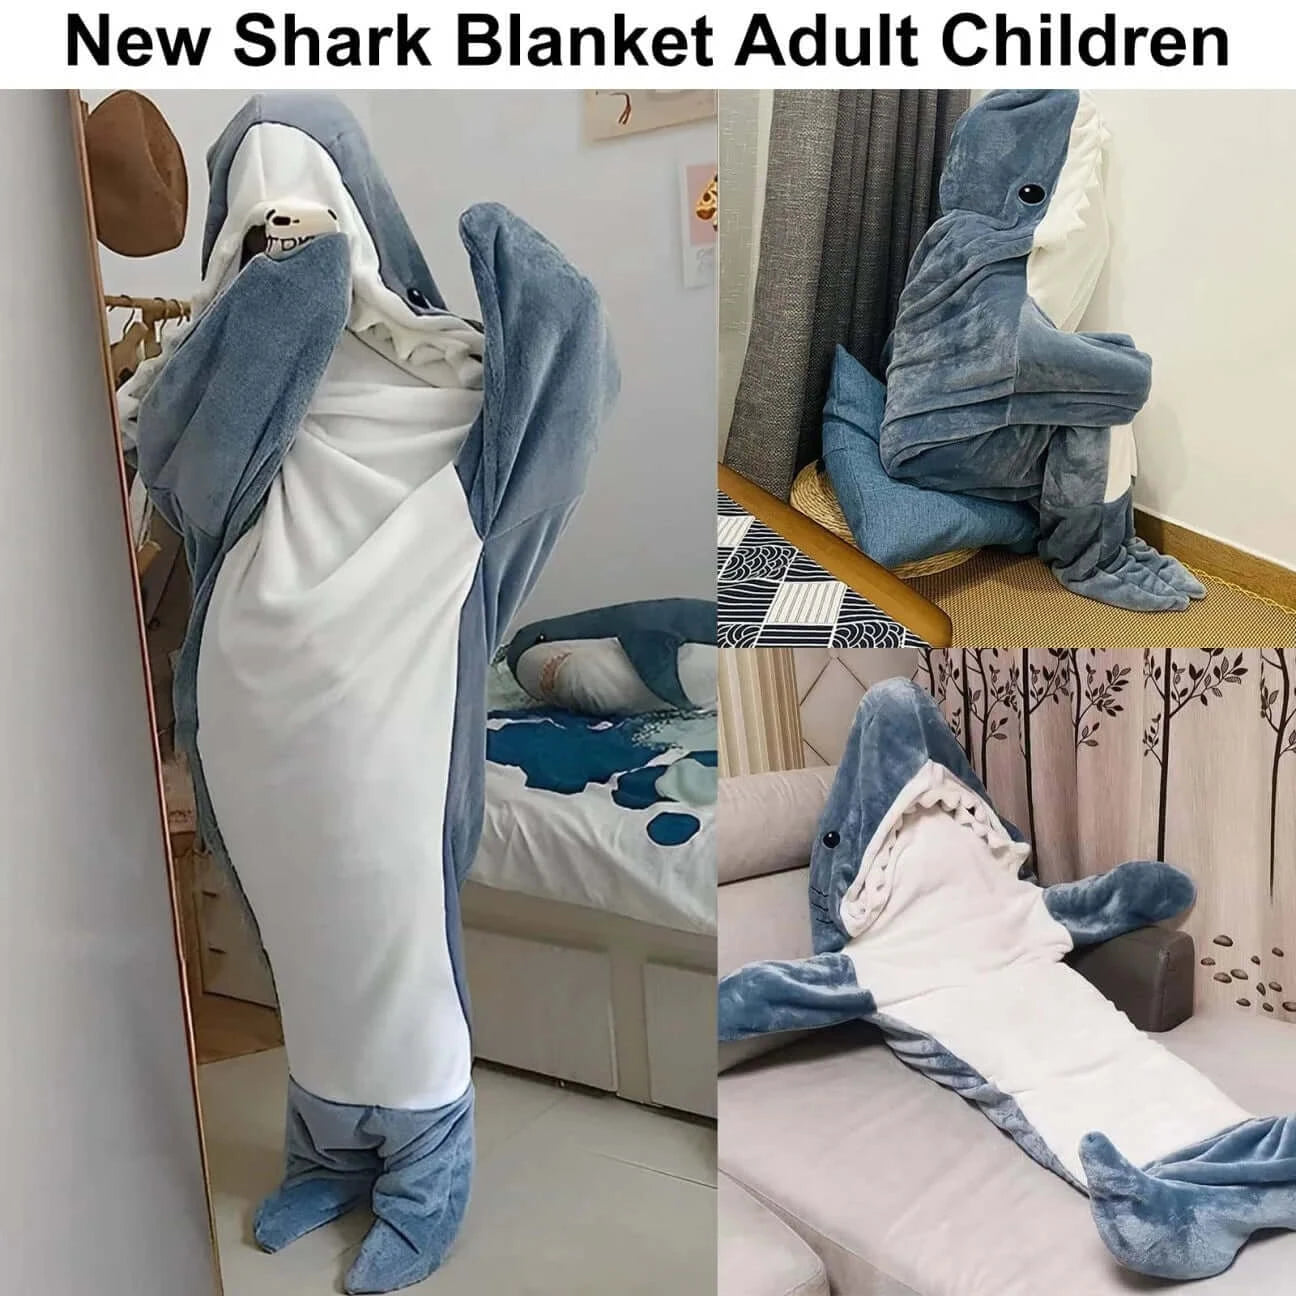 Snuggle with Jaws: Shark-Shaped Wearable Blanket